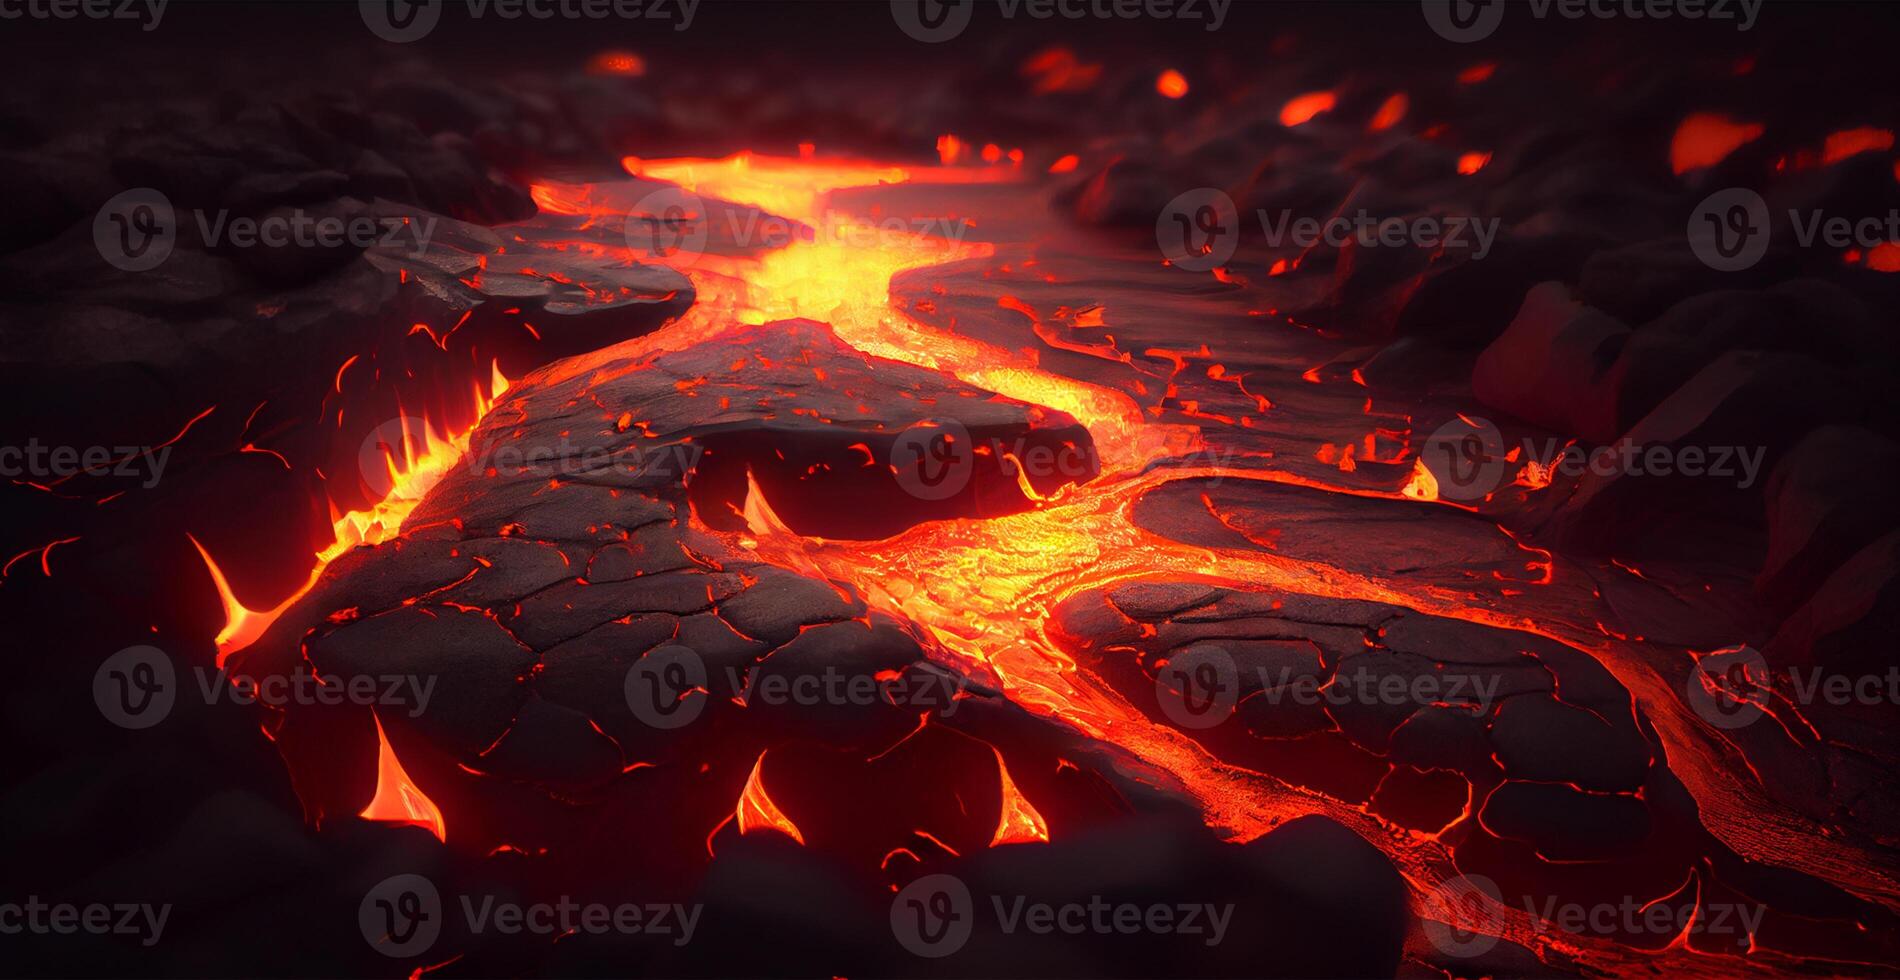 Molten lava or magma from a volcano - image photo